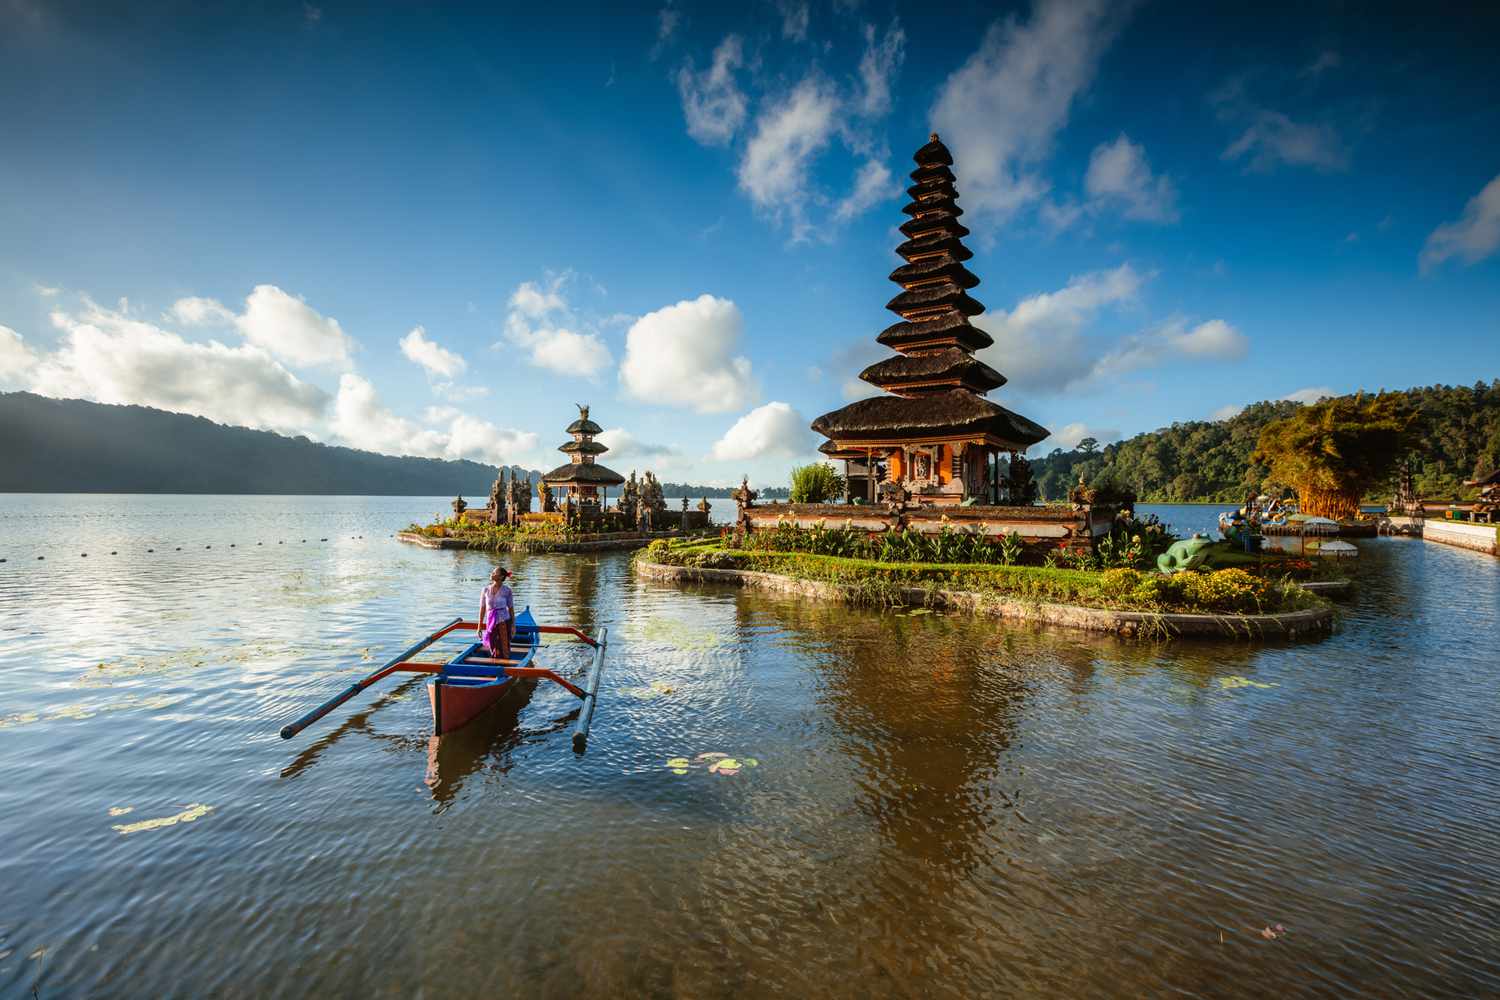 32 interesting facts about Bali